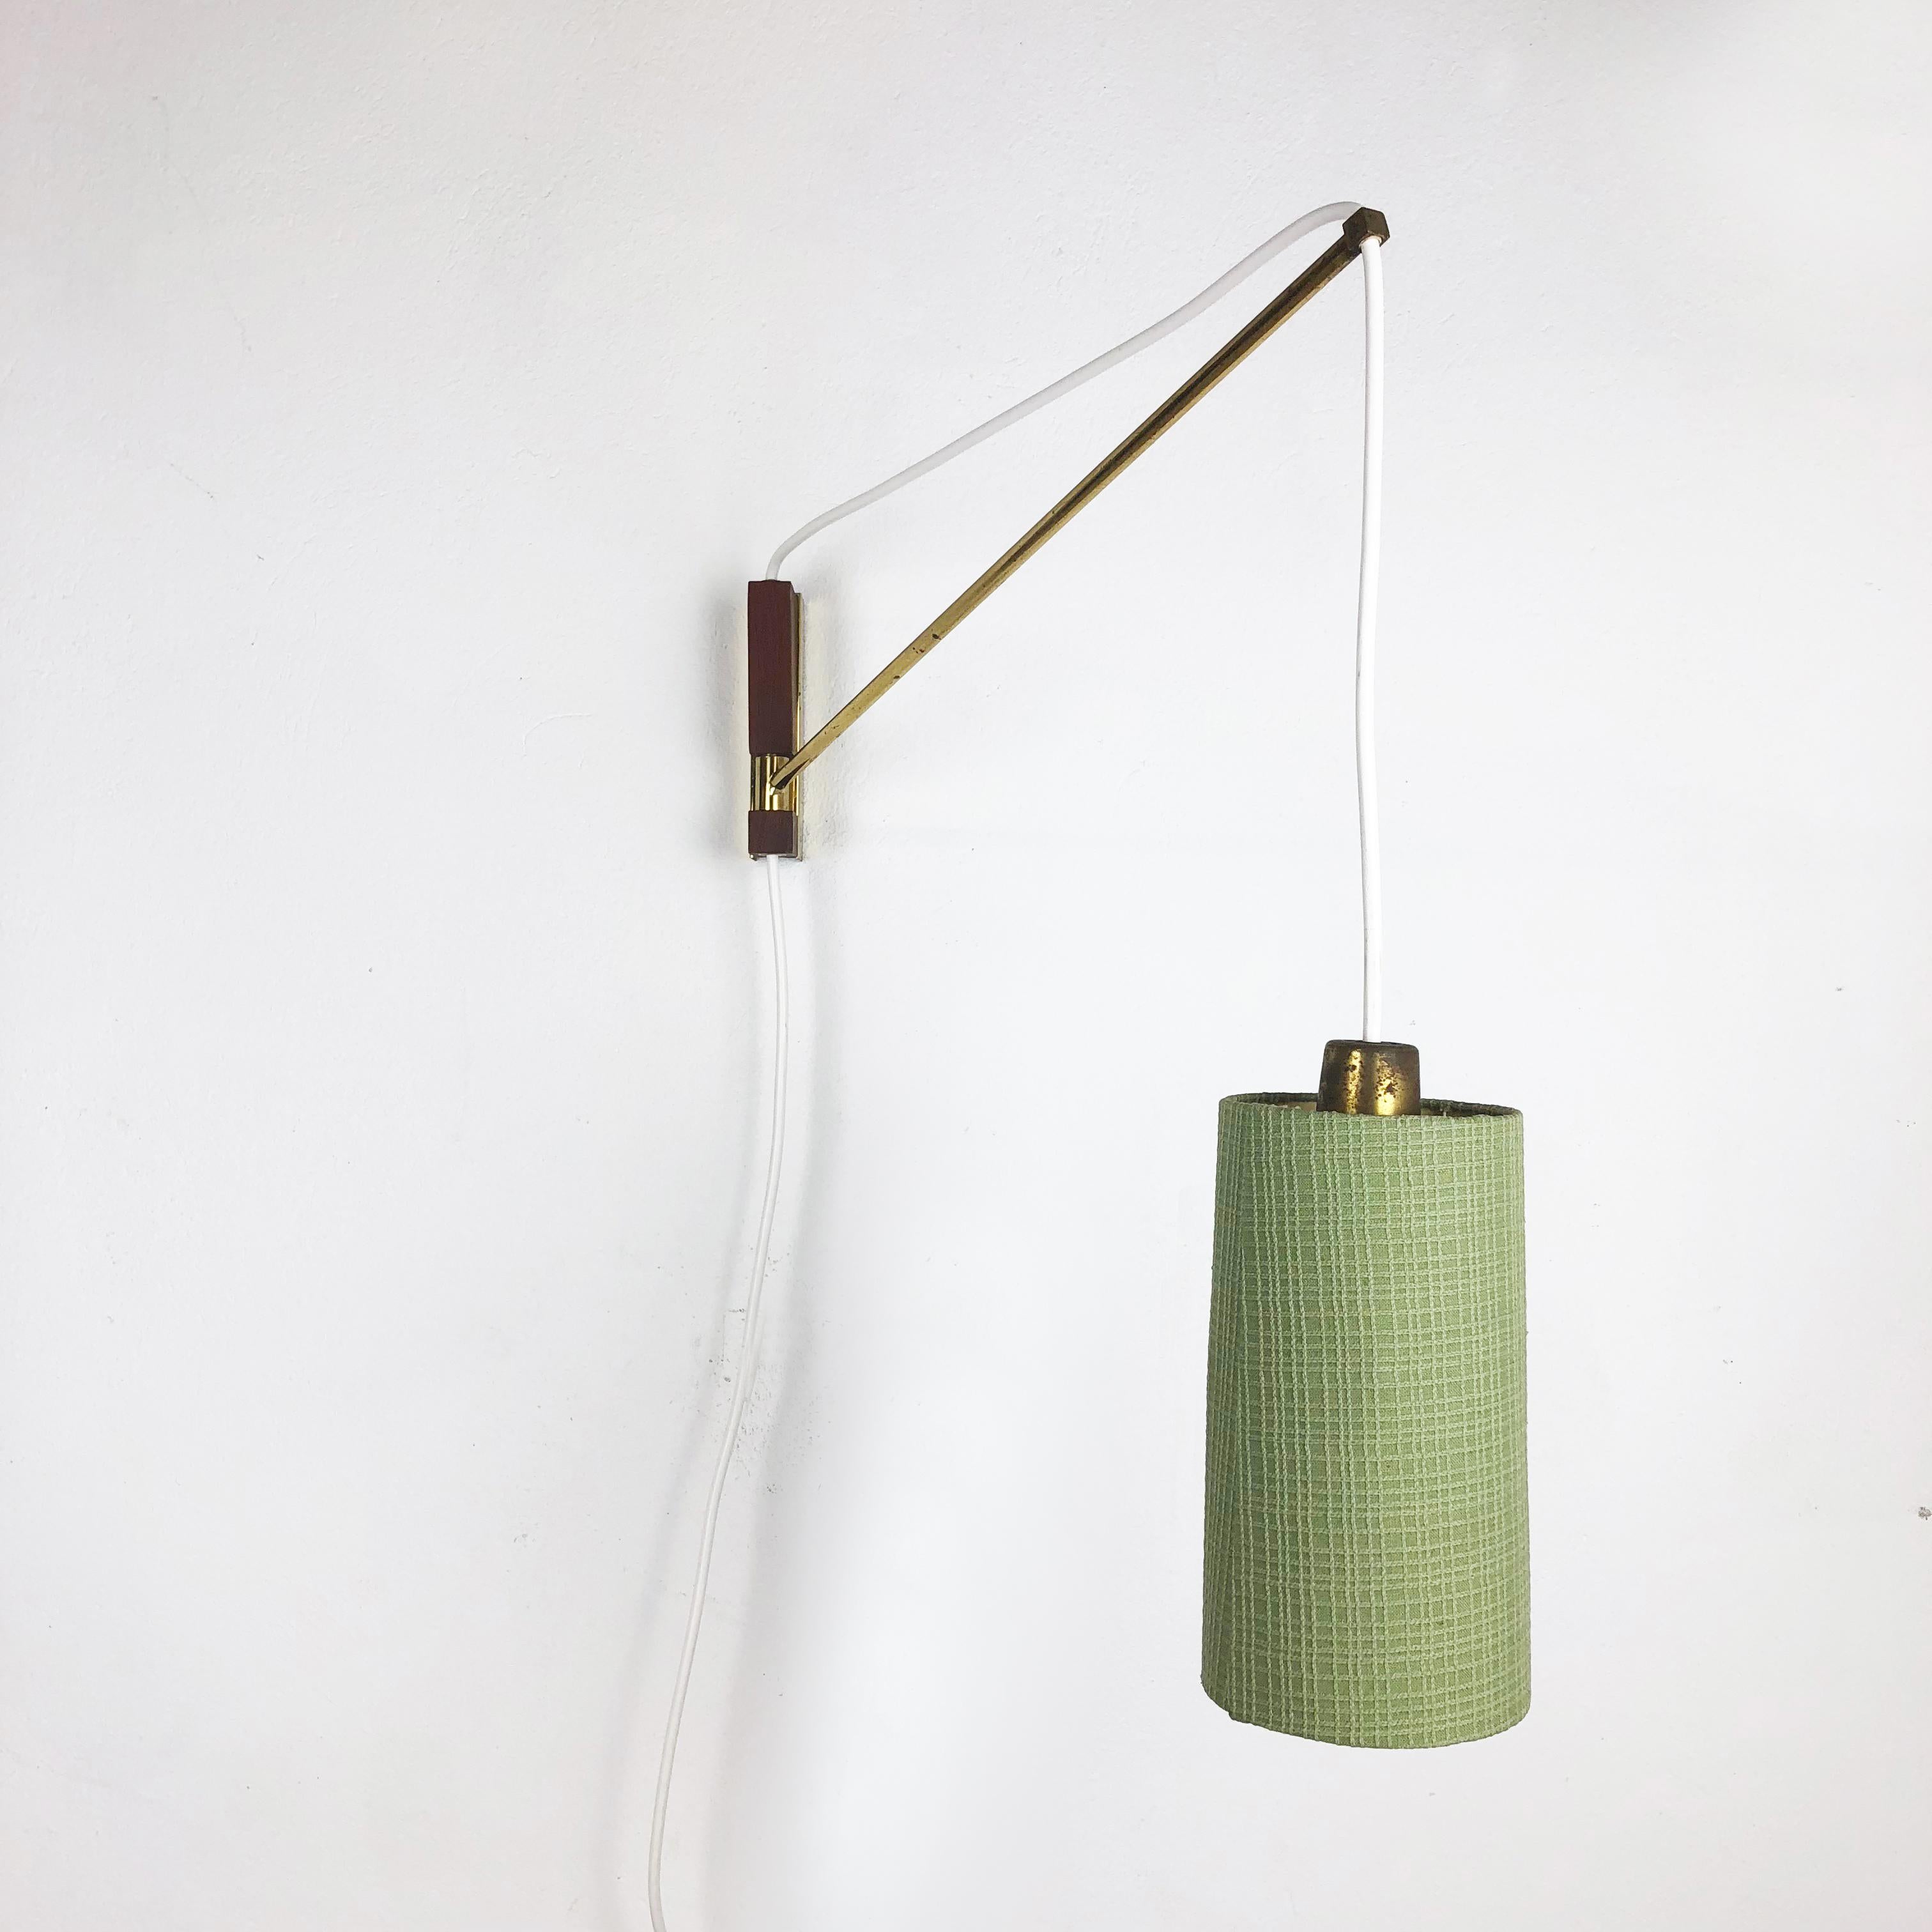 Article:

Wall light 


Origin:

Denmark


Decade:

1960s



Description:

This wall light was designed and produced in Denmark in the 1960s. The wall fixation of this light is made of metal with brass tone finish with a teak wood